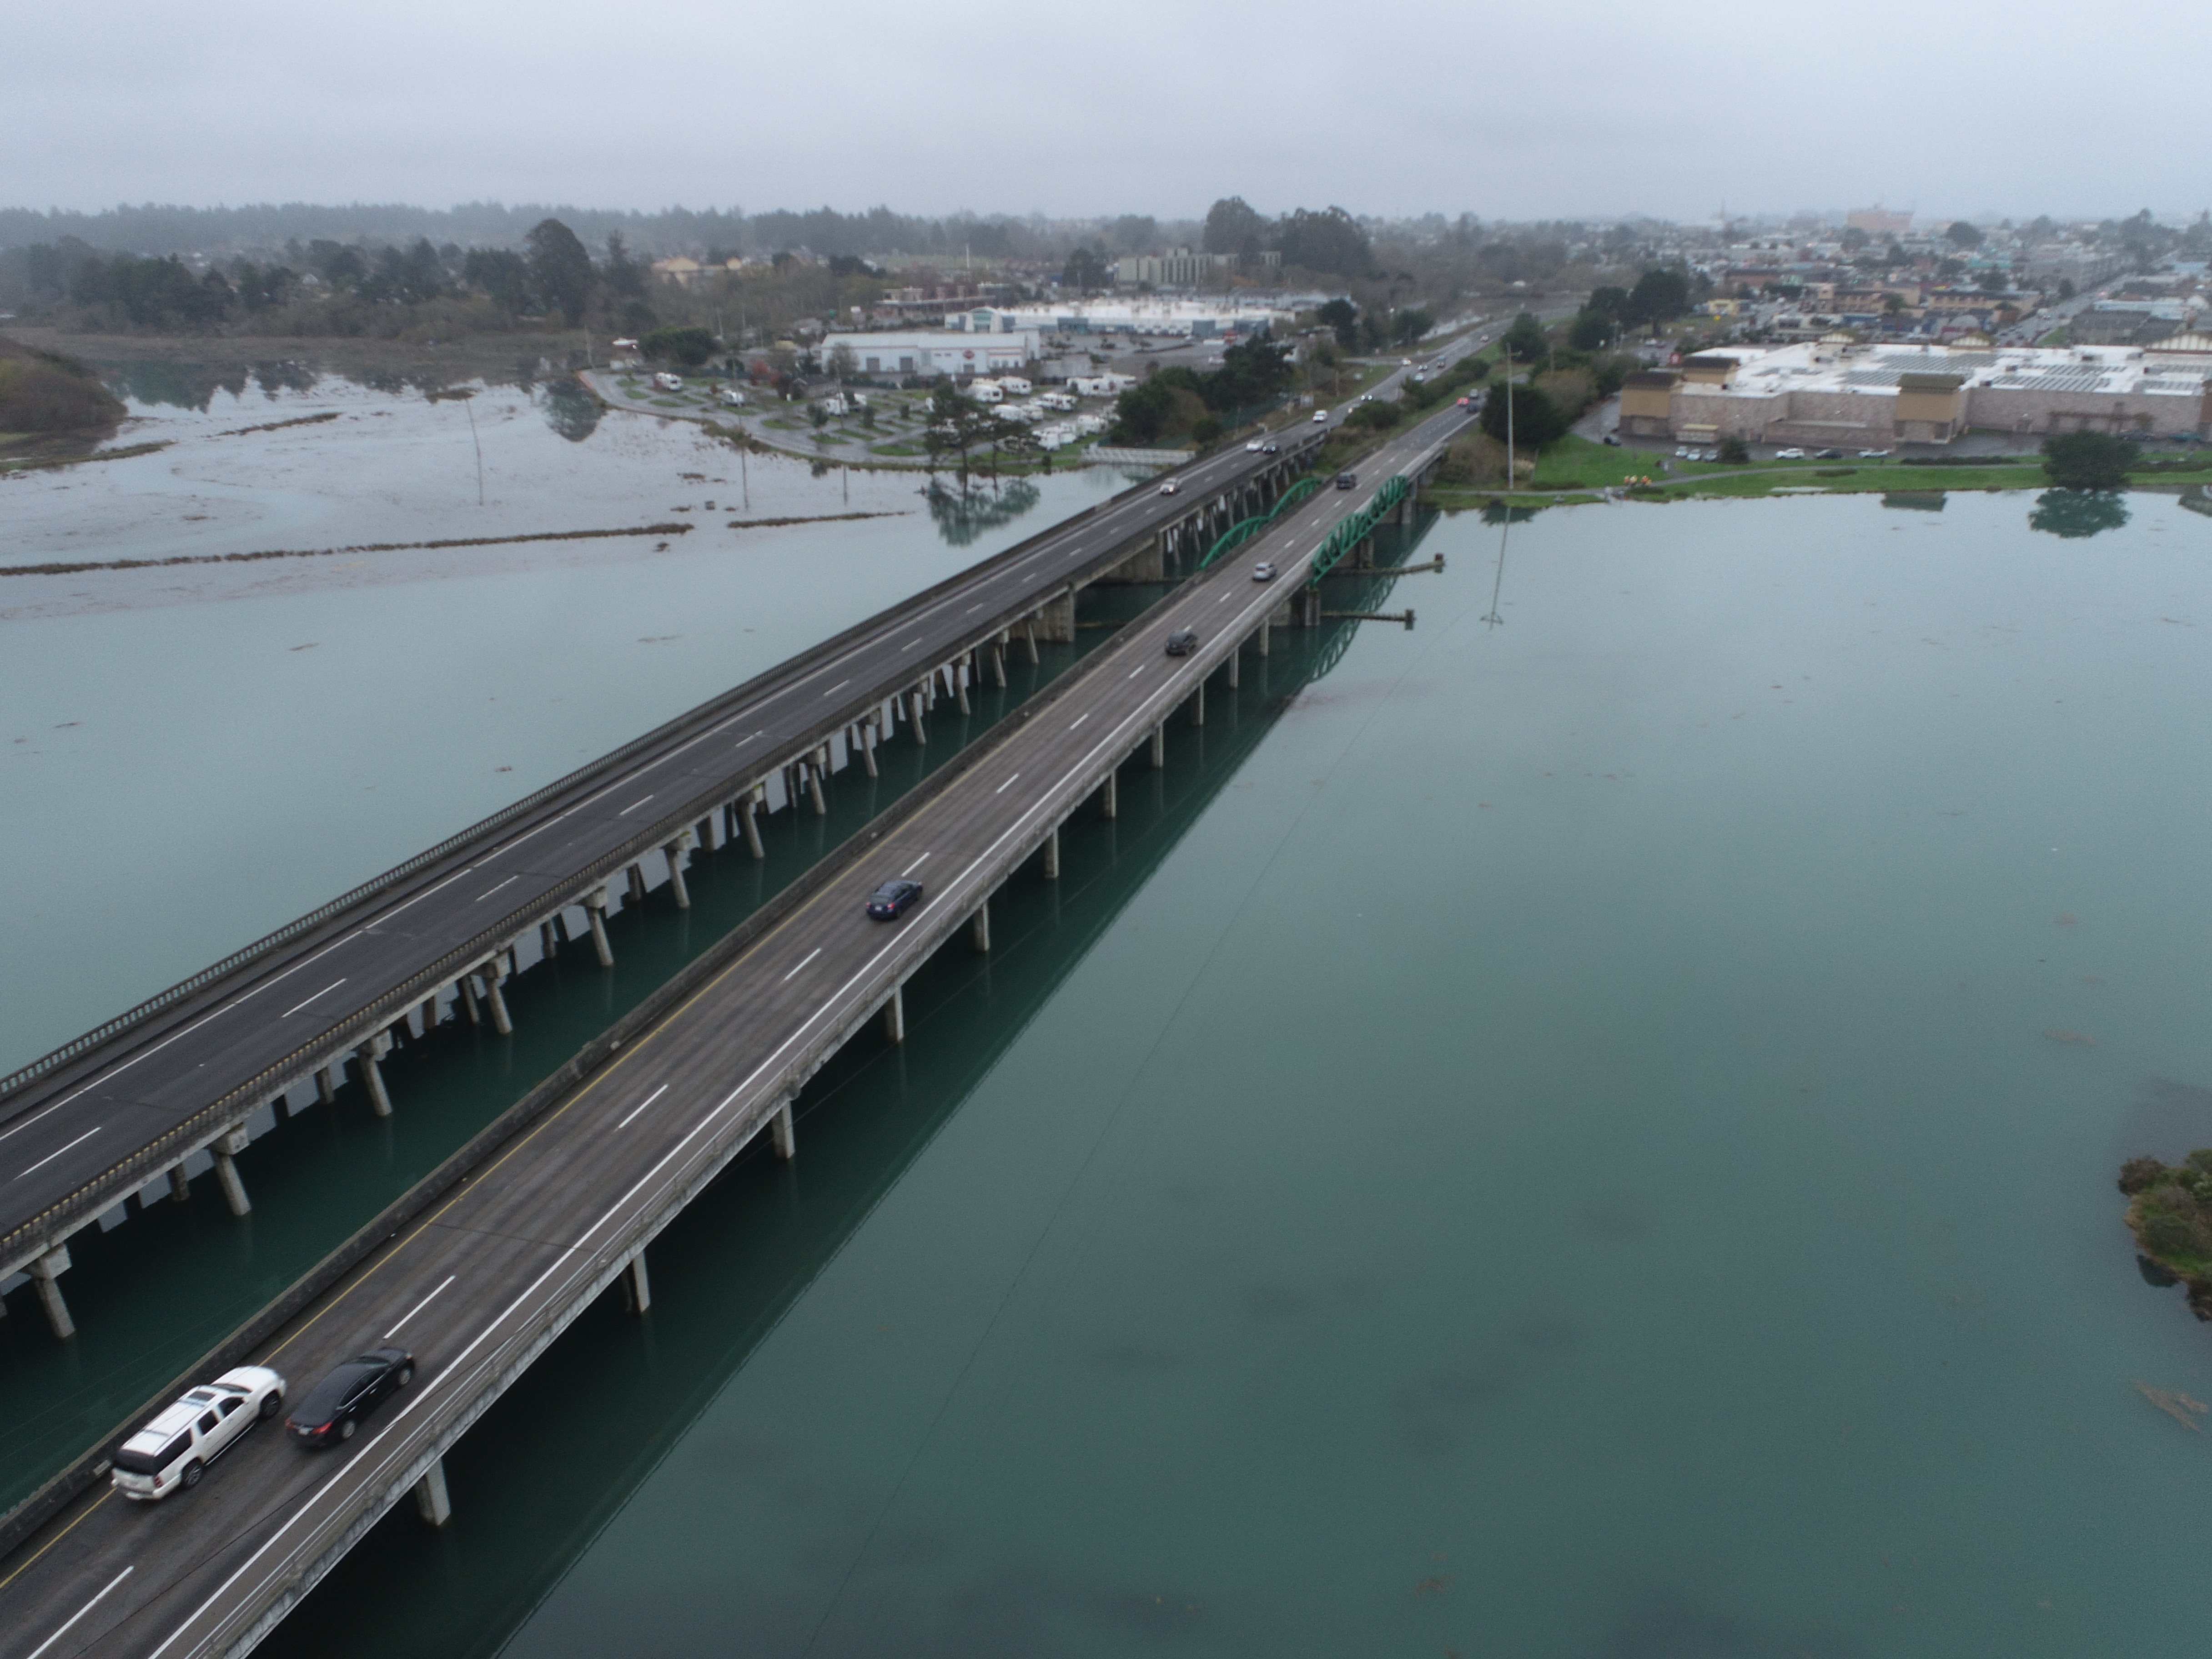 Aerial view of the Eureka Slough Bridge looking southeast. Vehicles travel on the bridge deck. Concrete pillars extend from under the bridge deck into the green water of the Eureka Slough. The northern edge of Eureka is visible in the background.